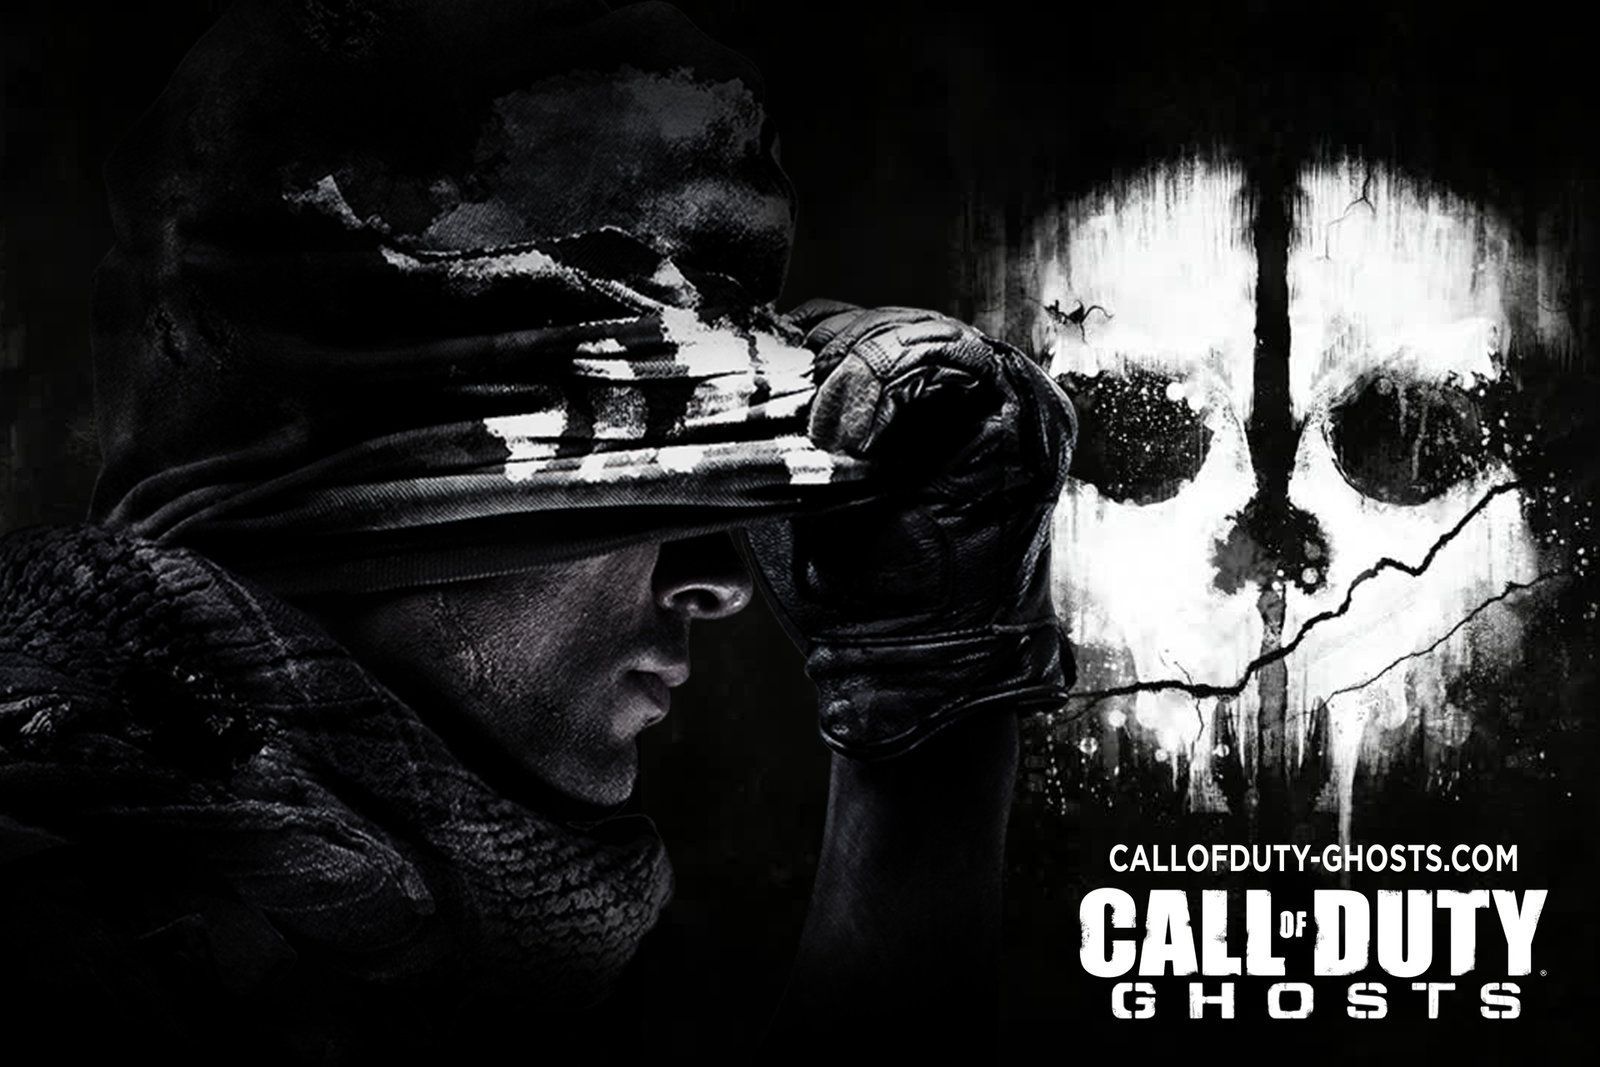 Call Of Duty Ghosts Wallpaper Hd [Your Popular HD Wallpaper] #ID67955